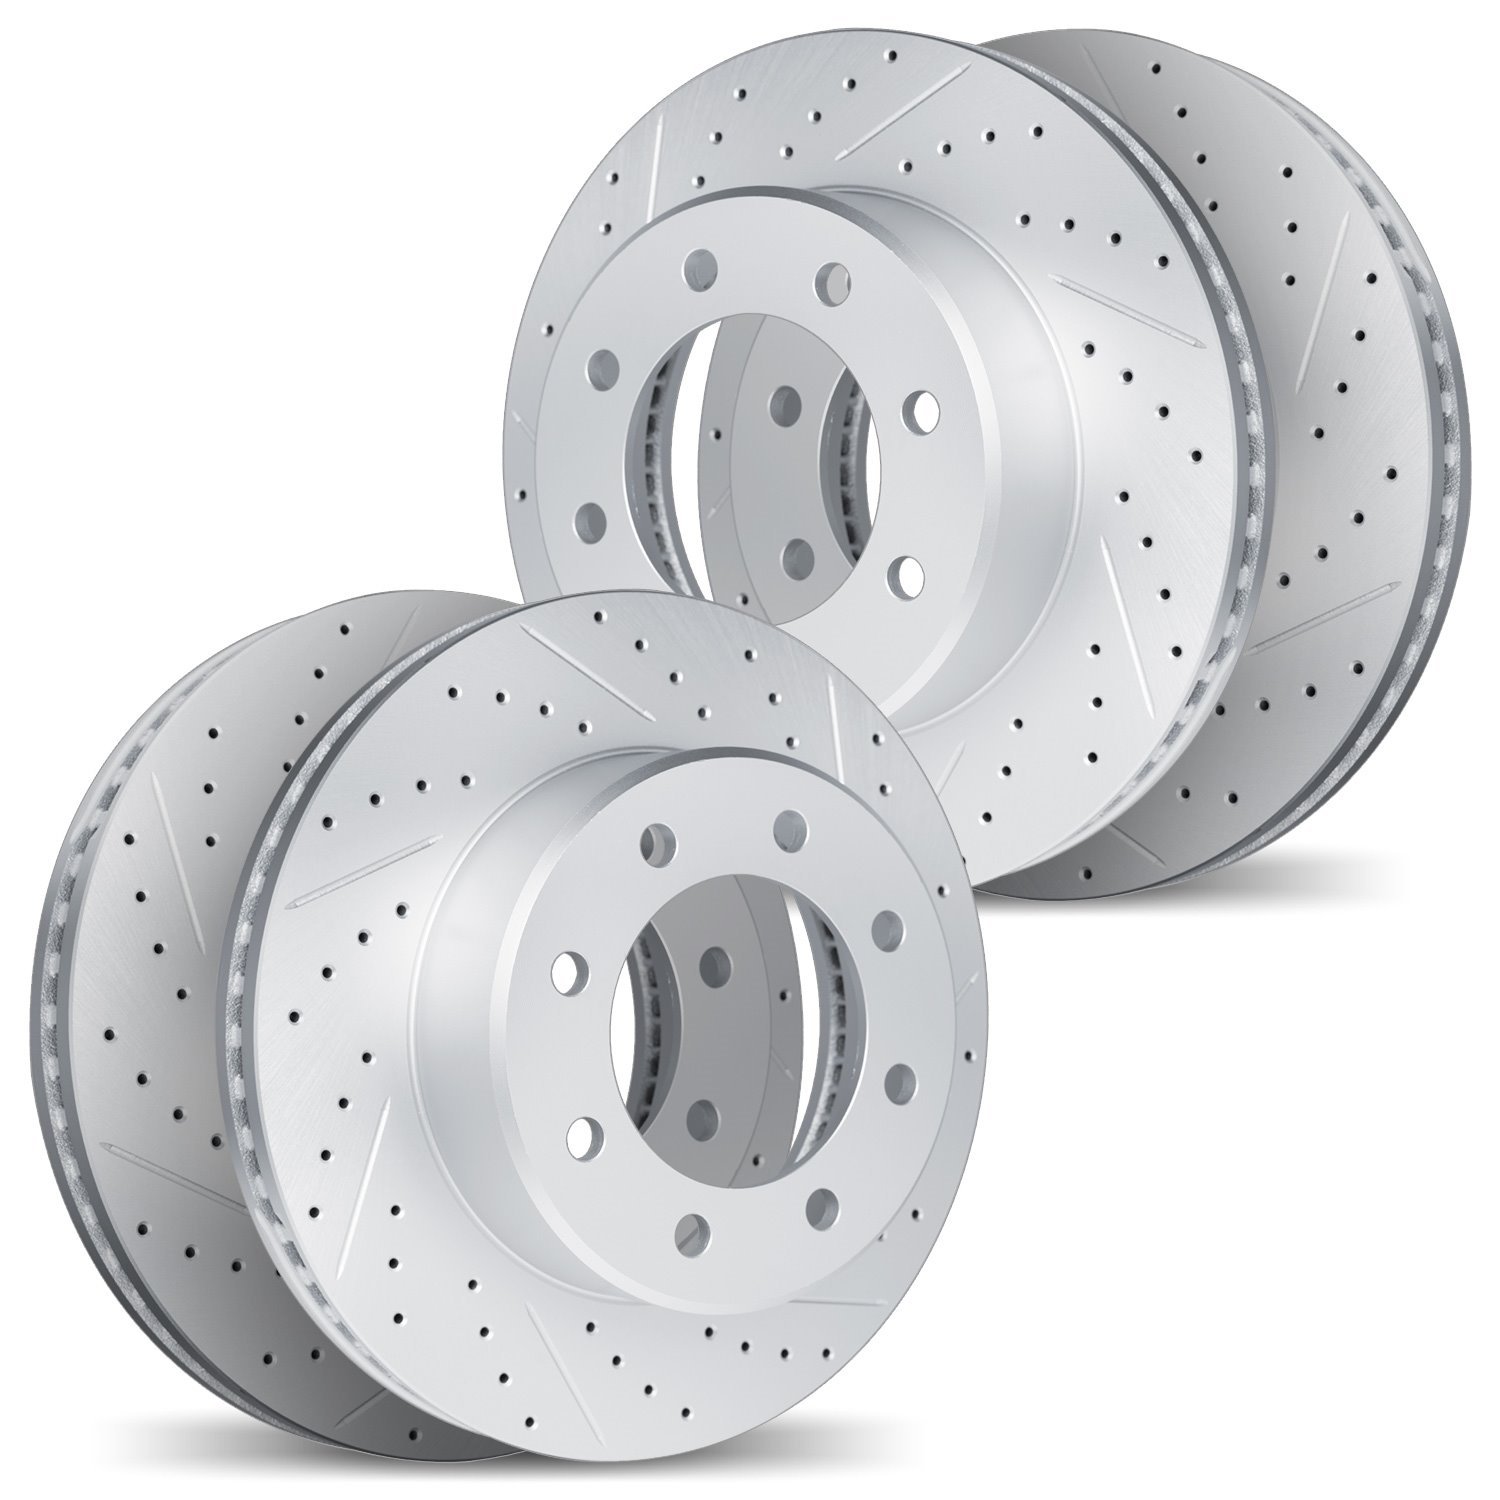 2004-54034 Geoperformance Drilled/Slotted Brake Rotors, Fits Select Ford/Lincoln/Mercury/Mazda, Position: Front and Rear